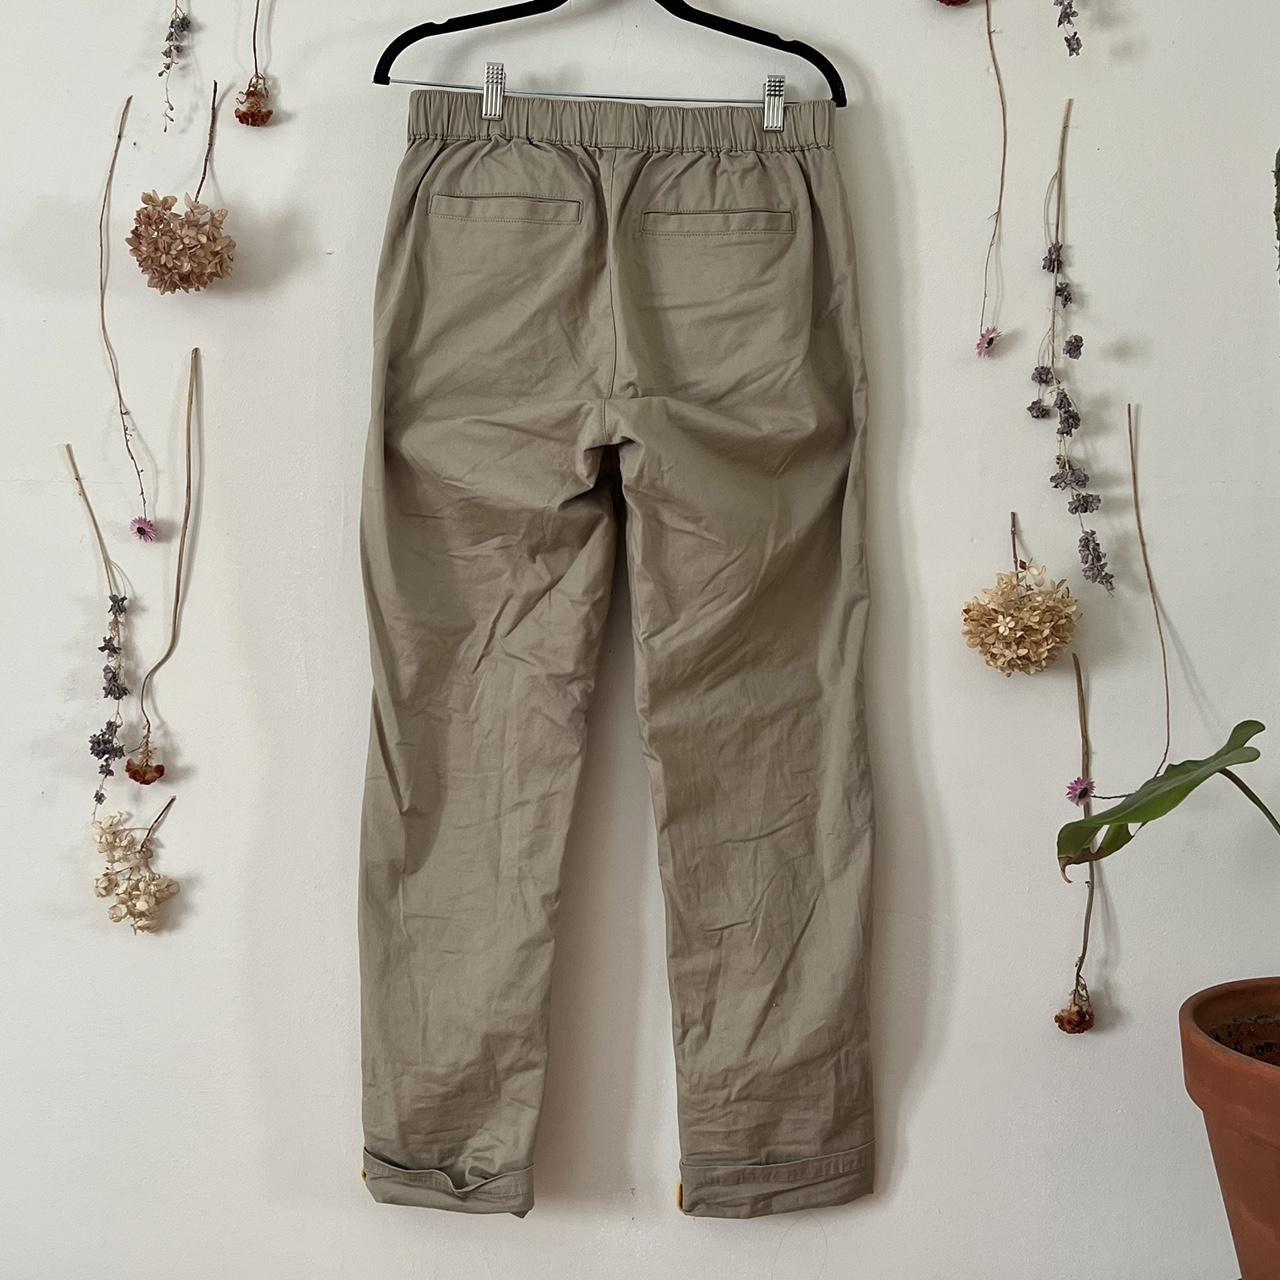 Pact Woven Twill Roll Up Pant Size M Durable organic... - Depop